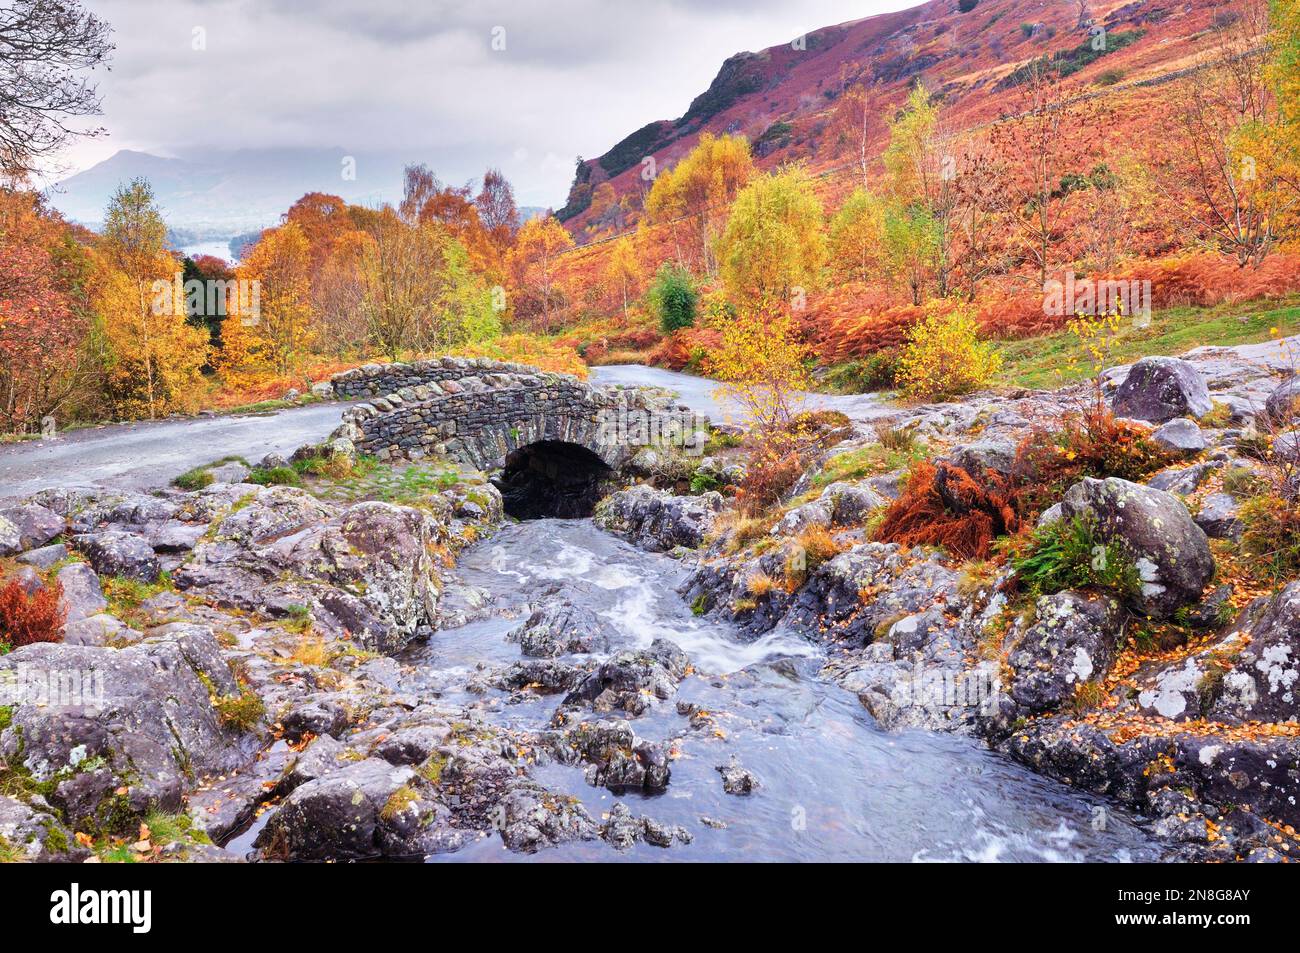 Steely greys with burnt autumn hues set the scene at the picturesque location of Ashness Bridge crossing Barrow Beck, Lake District National Park, UK Stock Photo